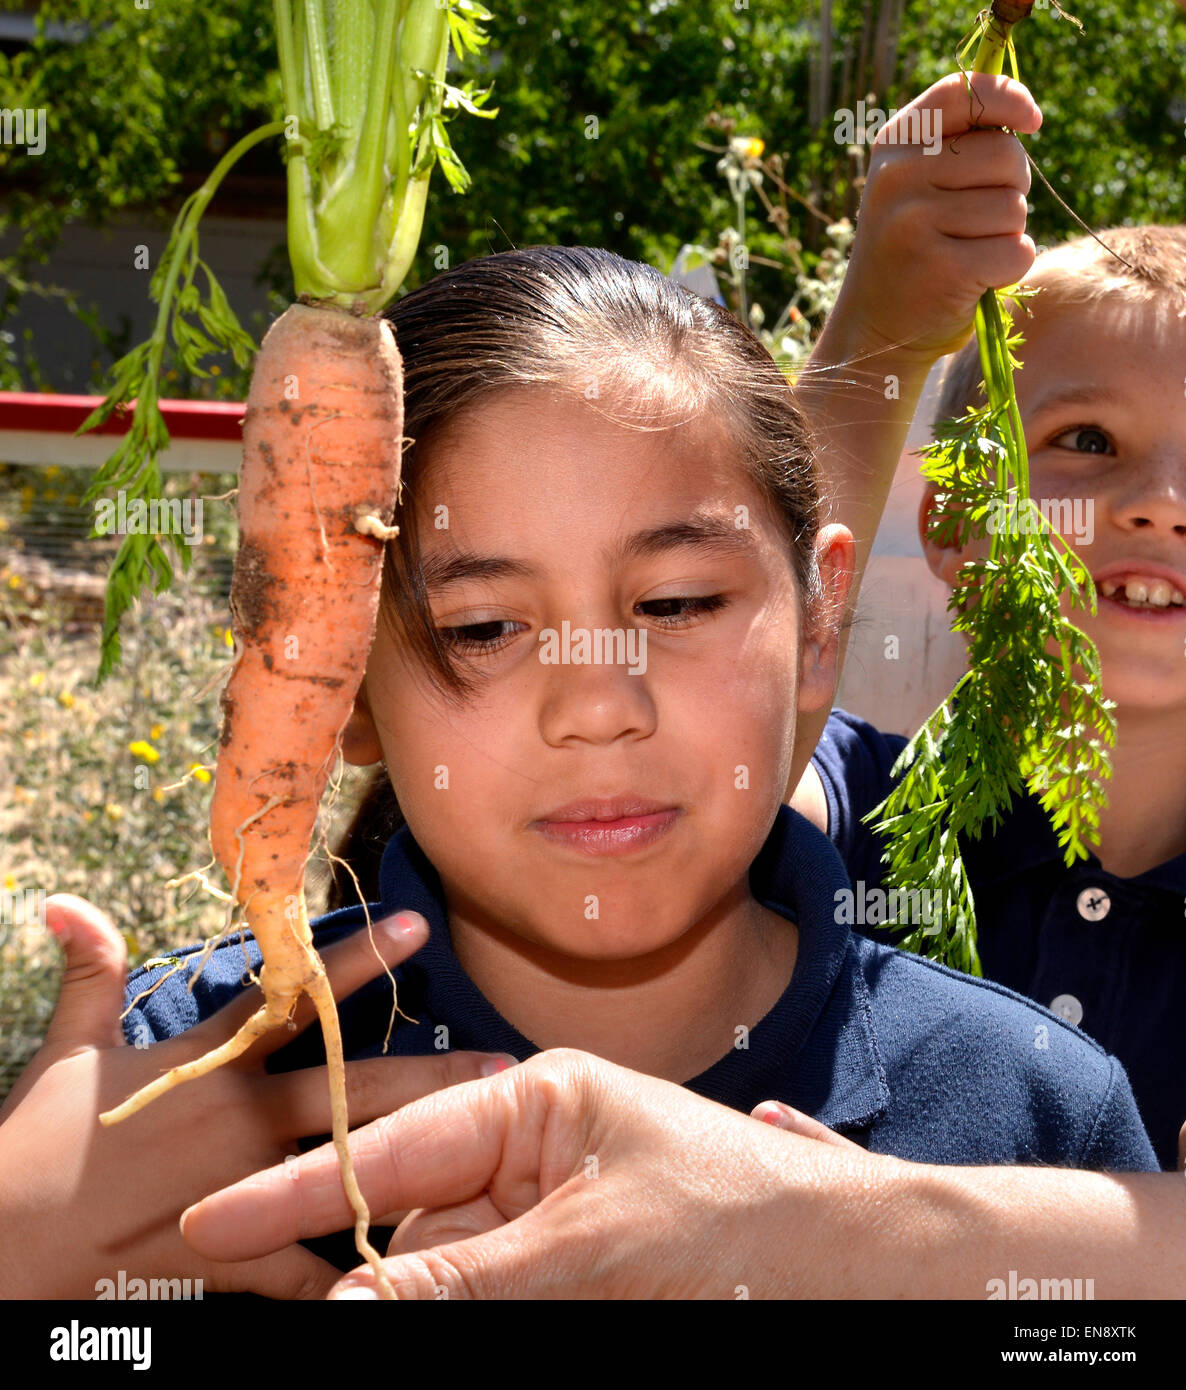 Tucson, Arizona, USA. 29 April, 2015: Second-grader, Valeria Gaona, 8, harvests an organic carrot from the garden at Manzo Elementary School, Tucson, Arizona, USA.  The school was the first in TUSD to be certified for garden to cafeteria food consumption and first in the state of Arizona for rainwater harvesting and composting. The  garden projects in the district work with internationally known Biosphere2 and the University of Arizona. The garden was built in conjunction with the National Park Foundation's First Bloom program. Credit:  Norma Jean Gargasz/Alamy Live News Stock Photo